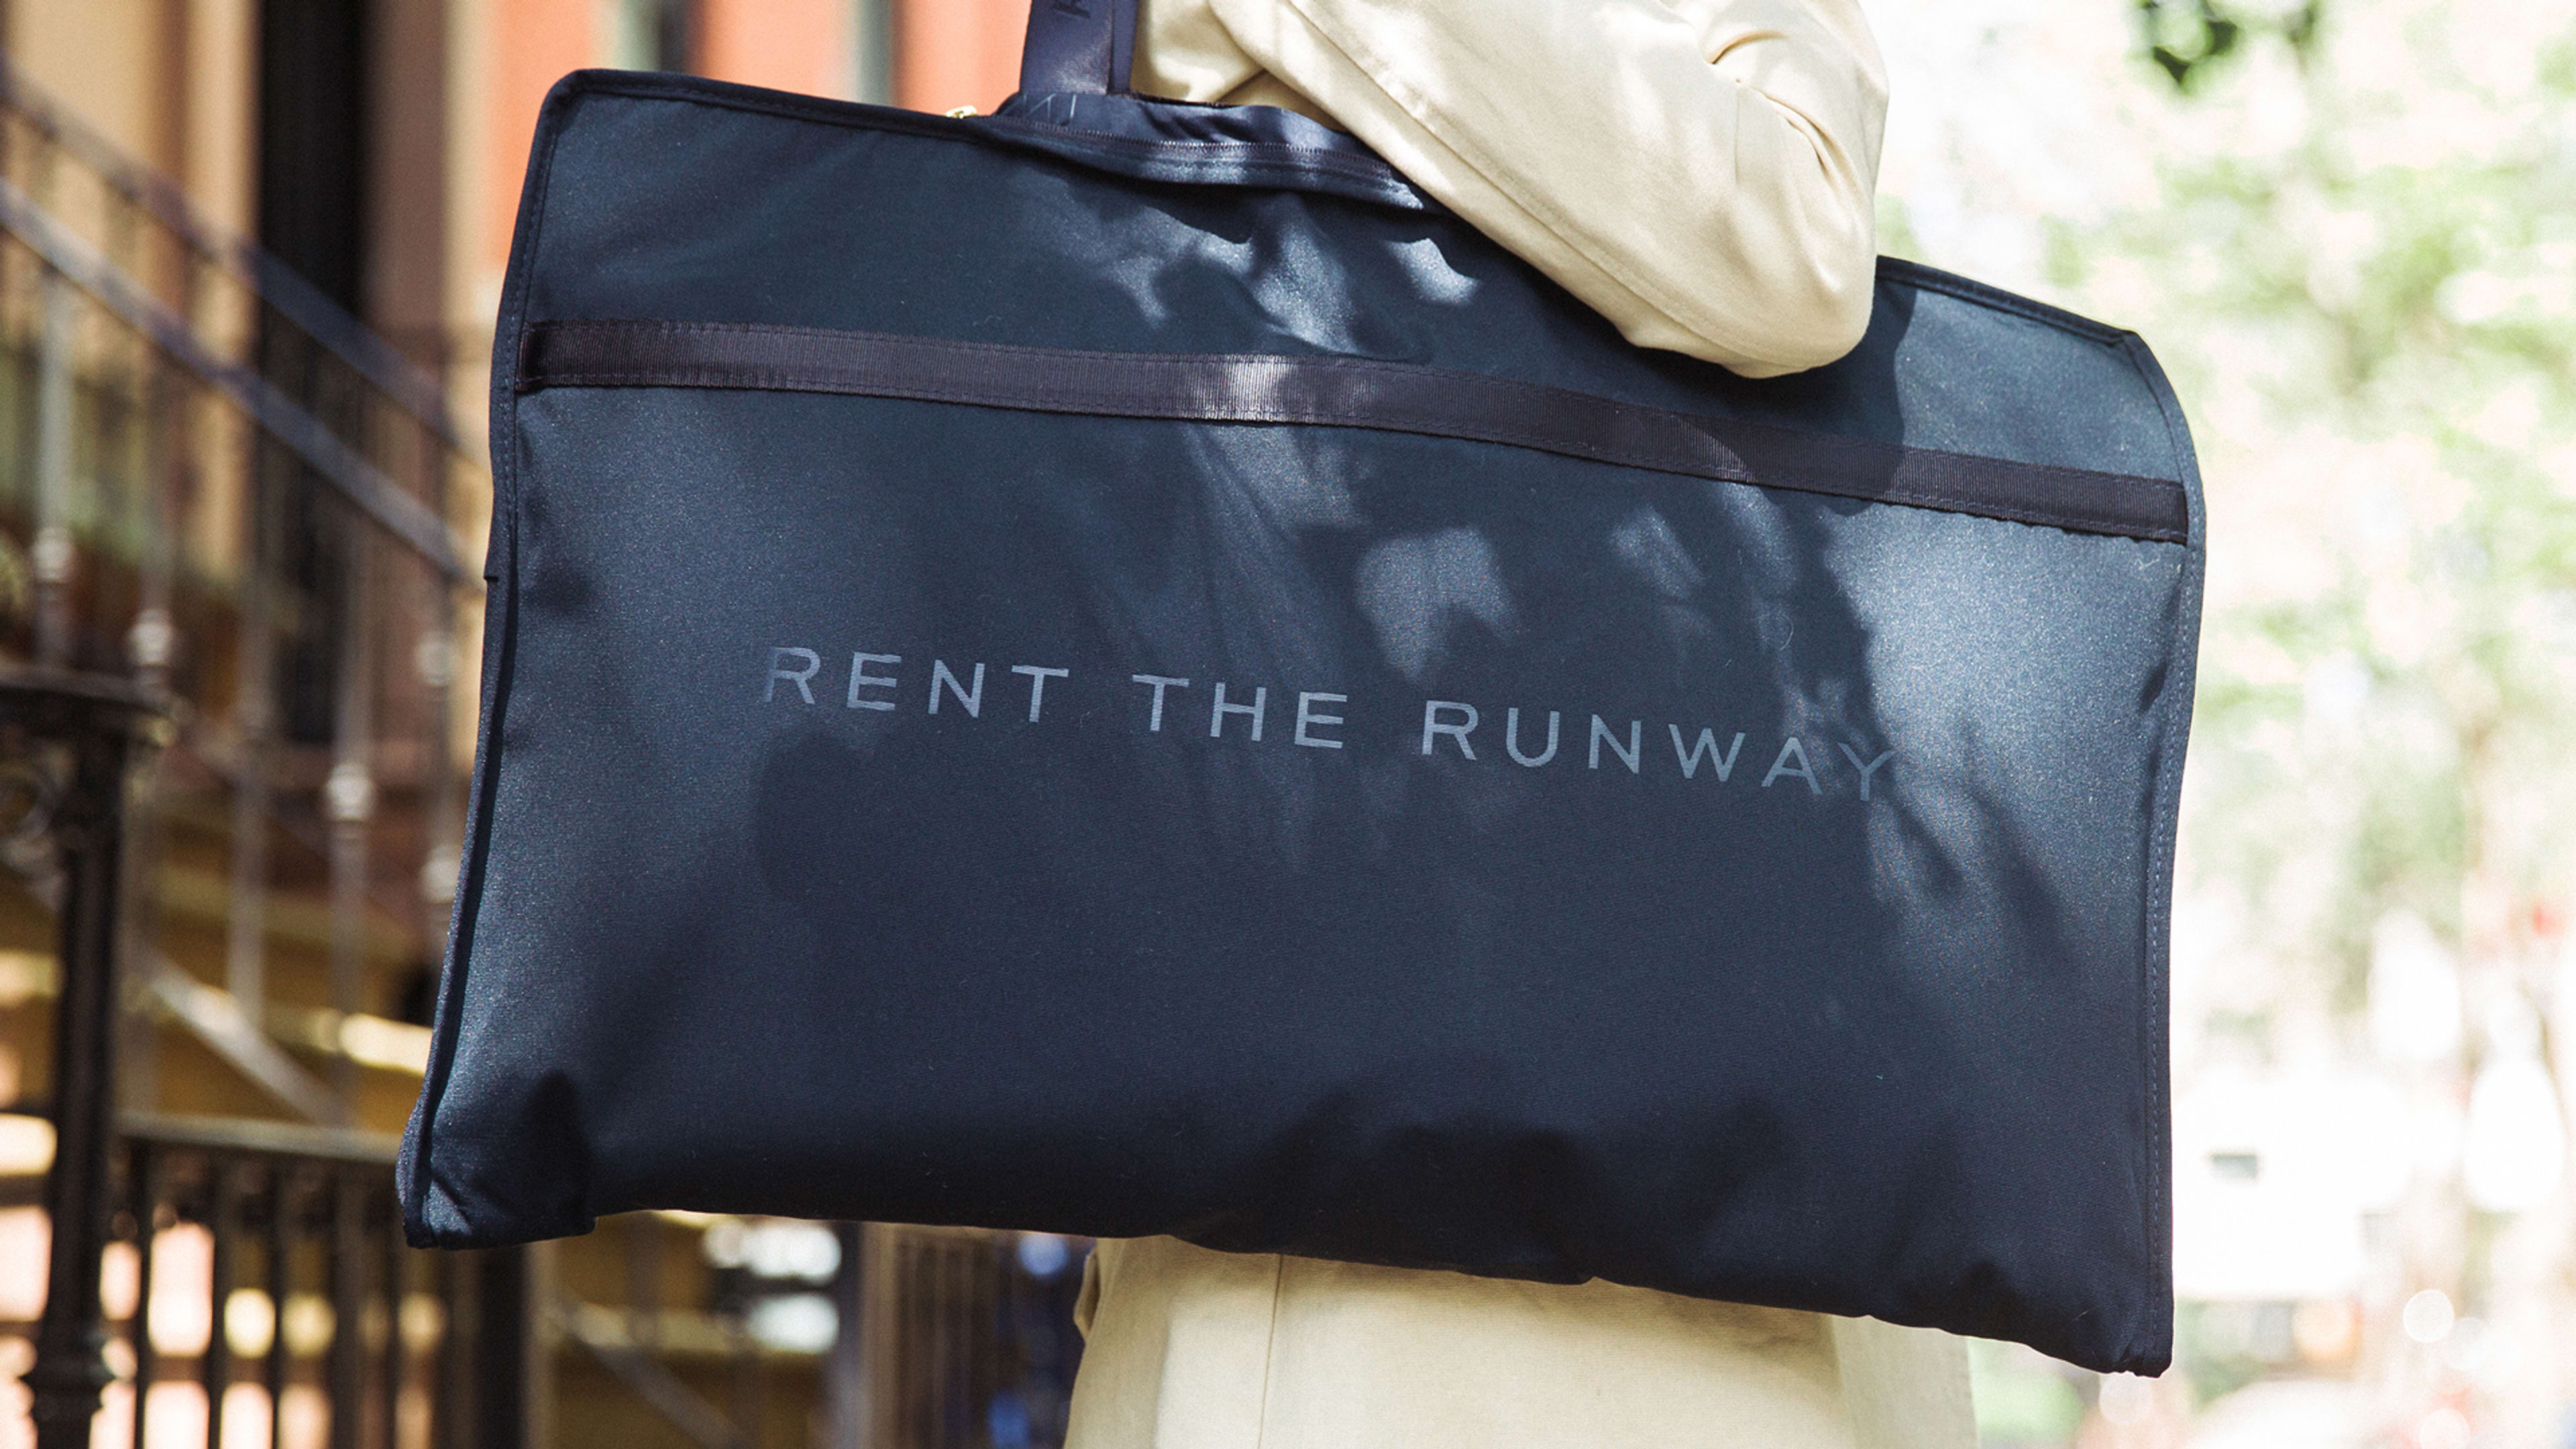 Rent more than the runway: Why soon, you won’t own any clothes at all